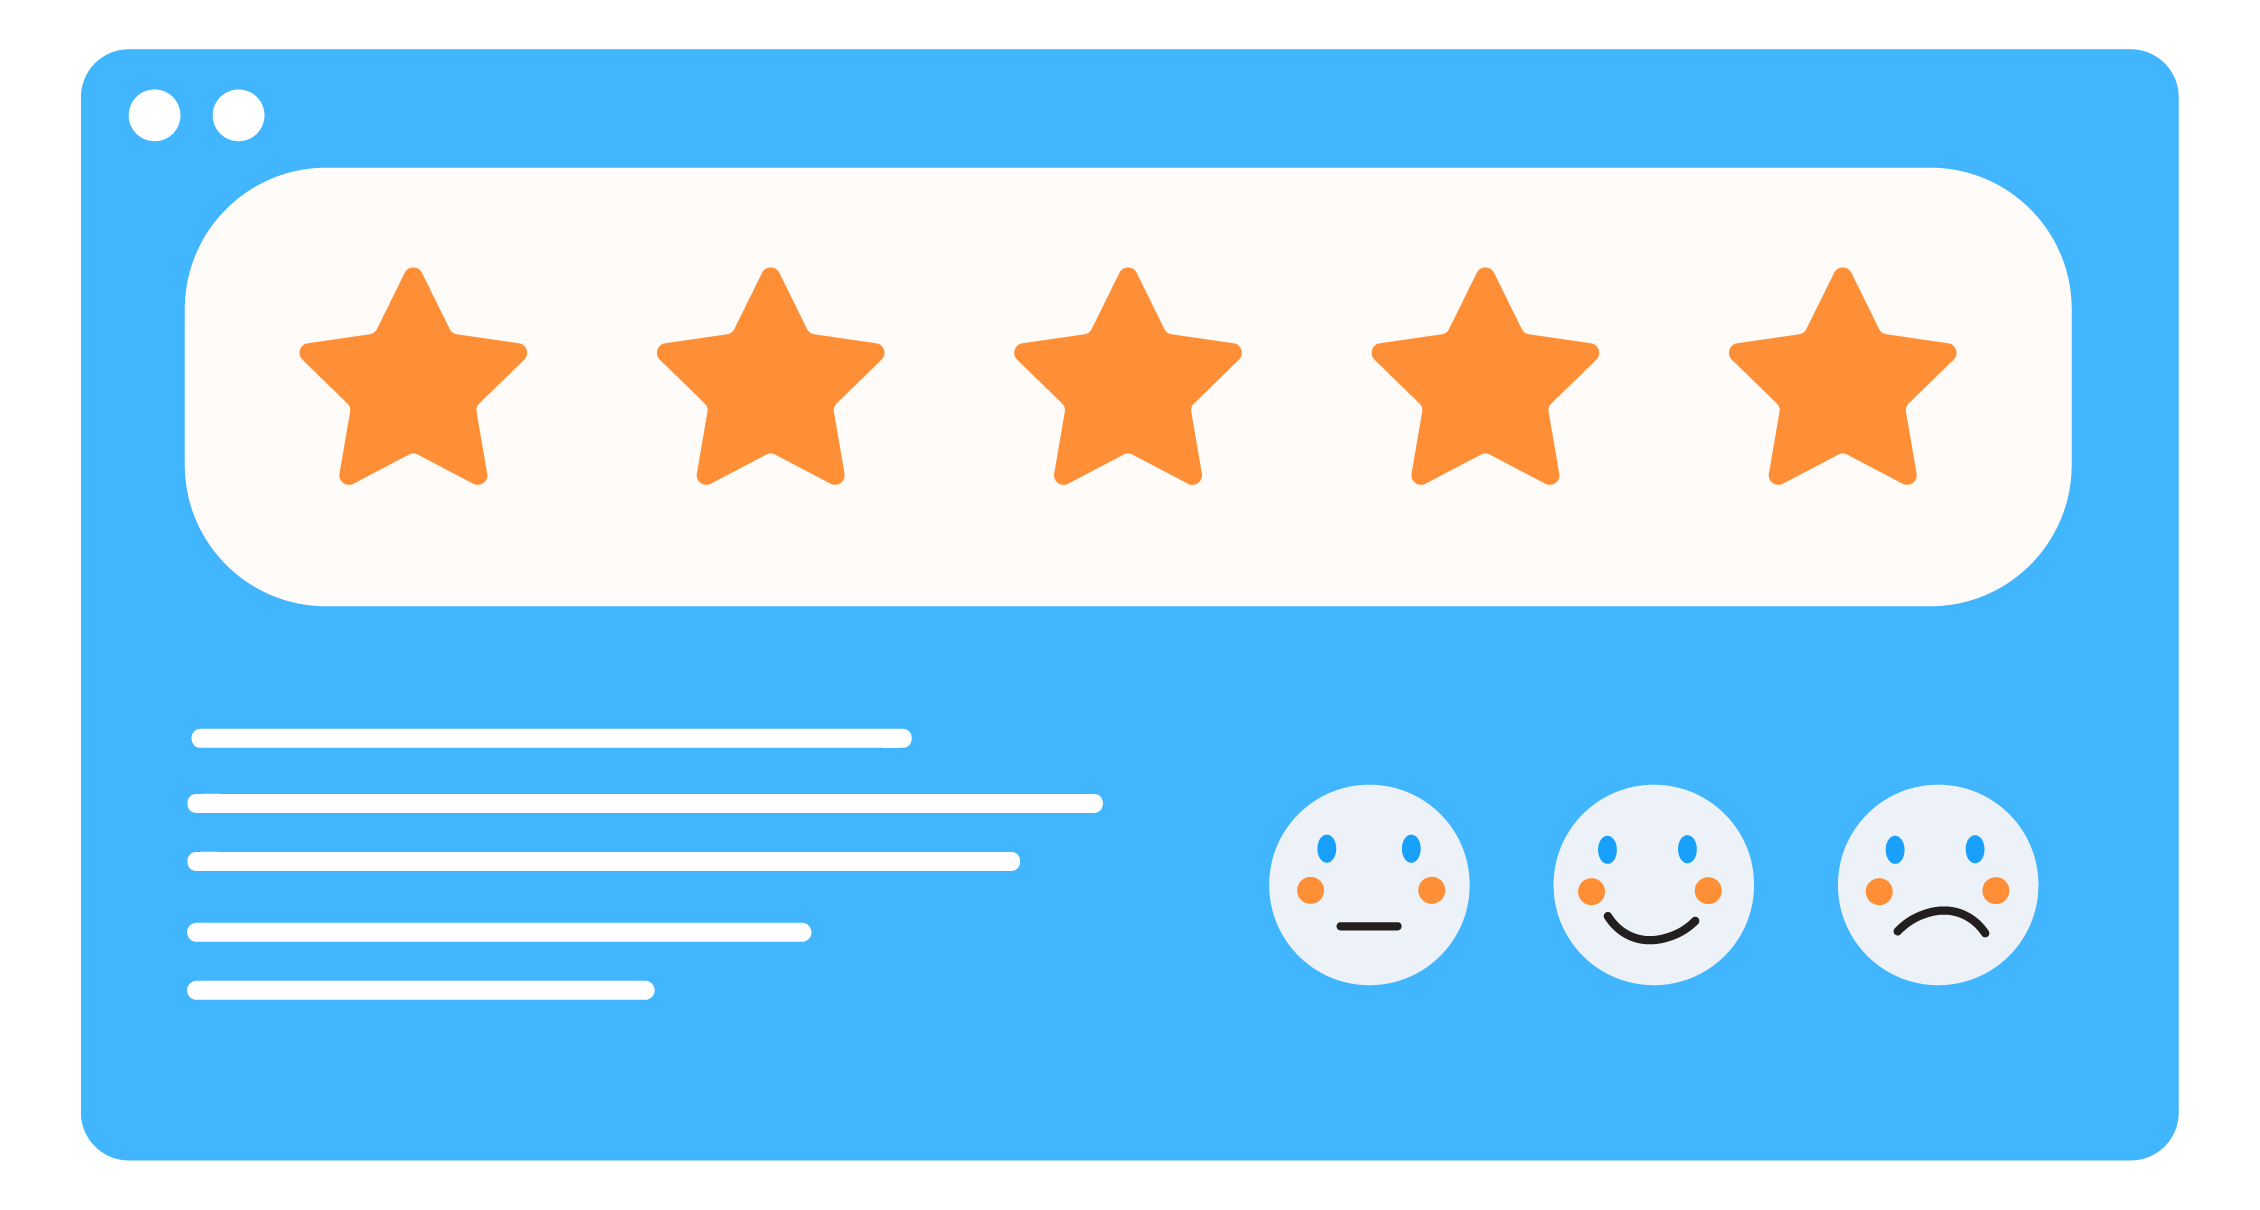 Rating and Reviews